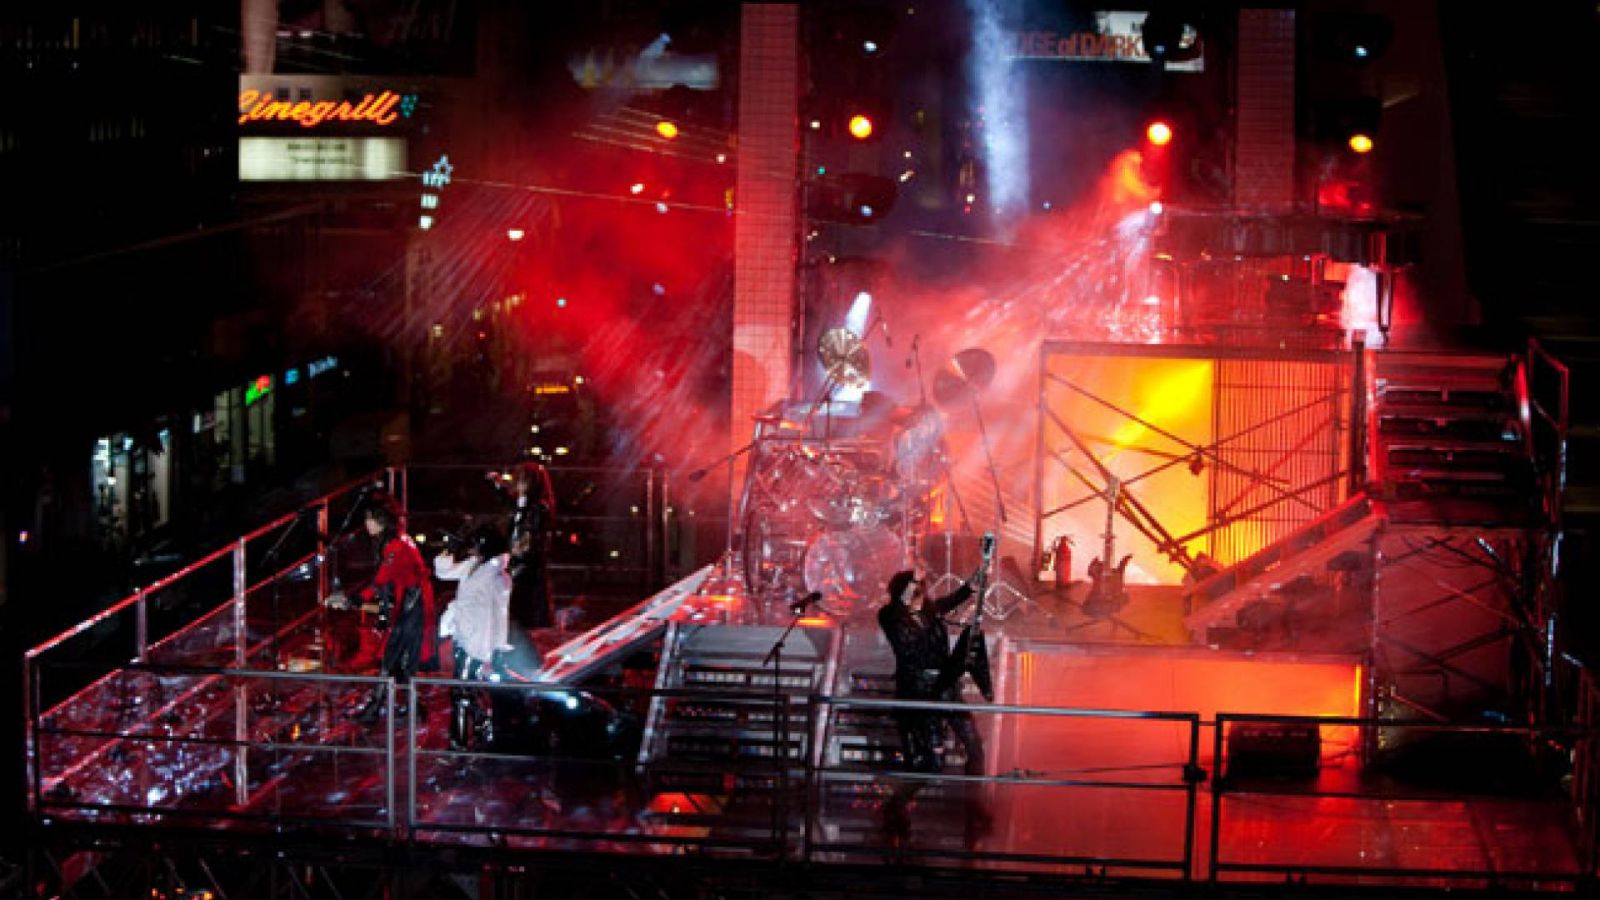 X JAPAN Invites Fans to "X-perience" a Music Video Shoot in Los Angeles © YSK Entertainment, Inc. 2010. All Rights Reserved